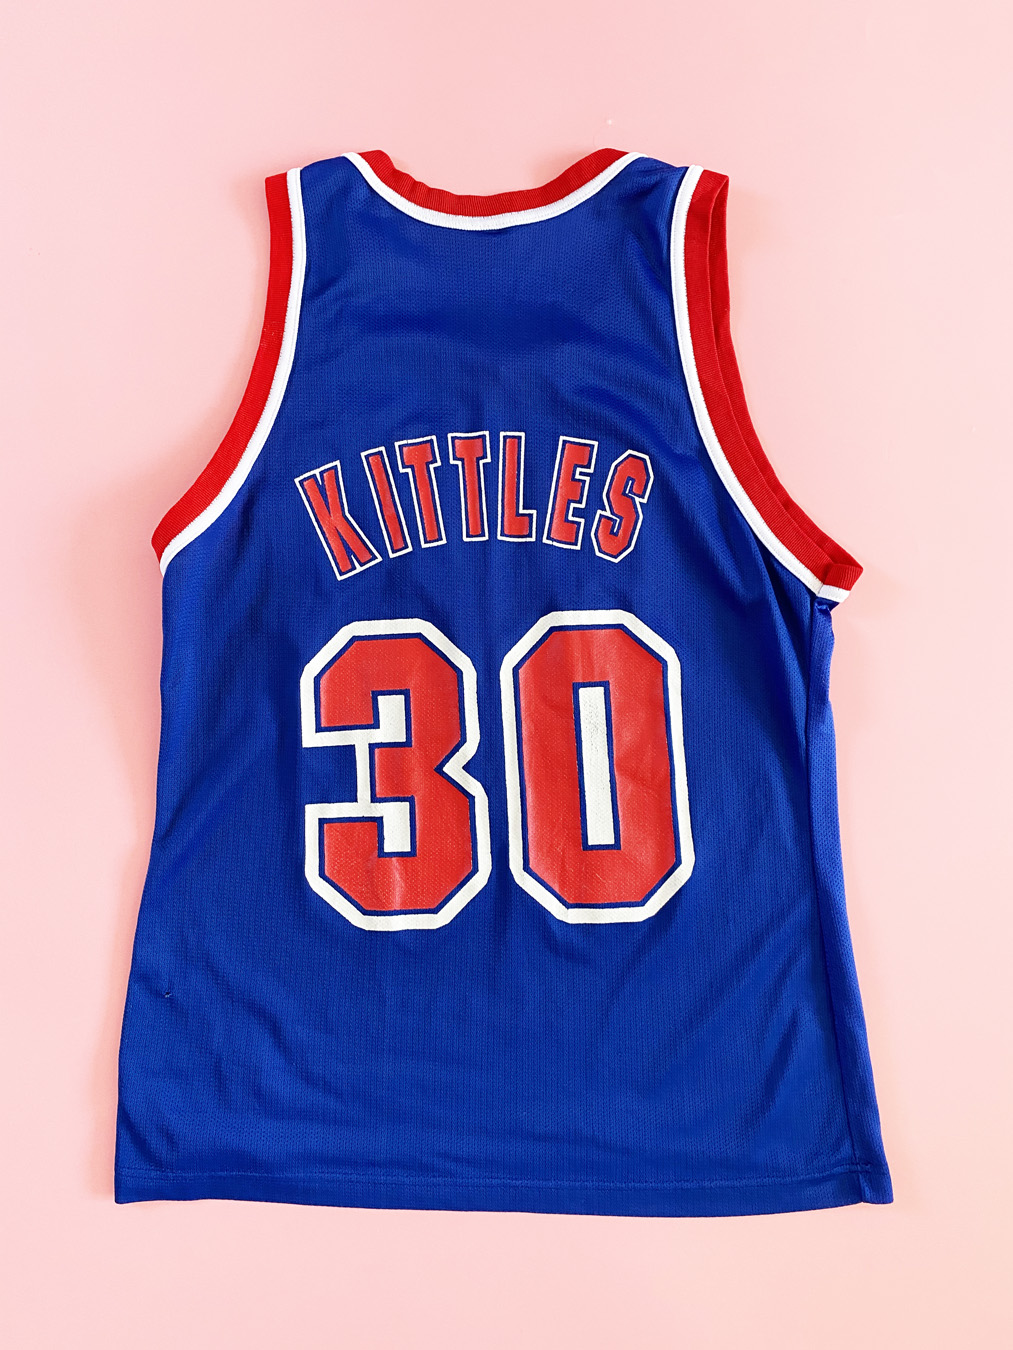 90s Kerry Kittles New Jersey Nets Throwback Champion Jersey - 5 Star Vintage